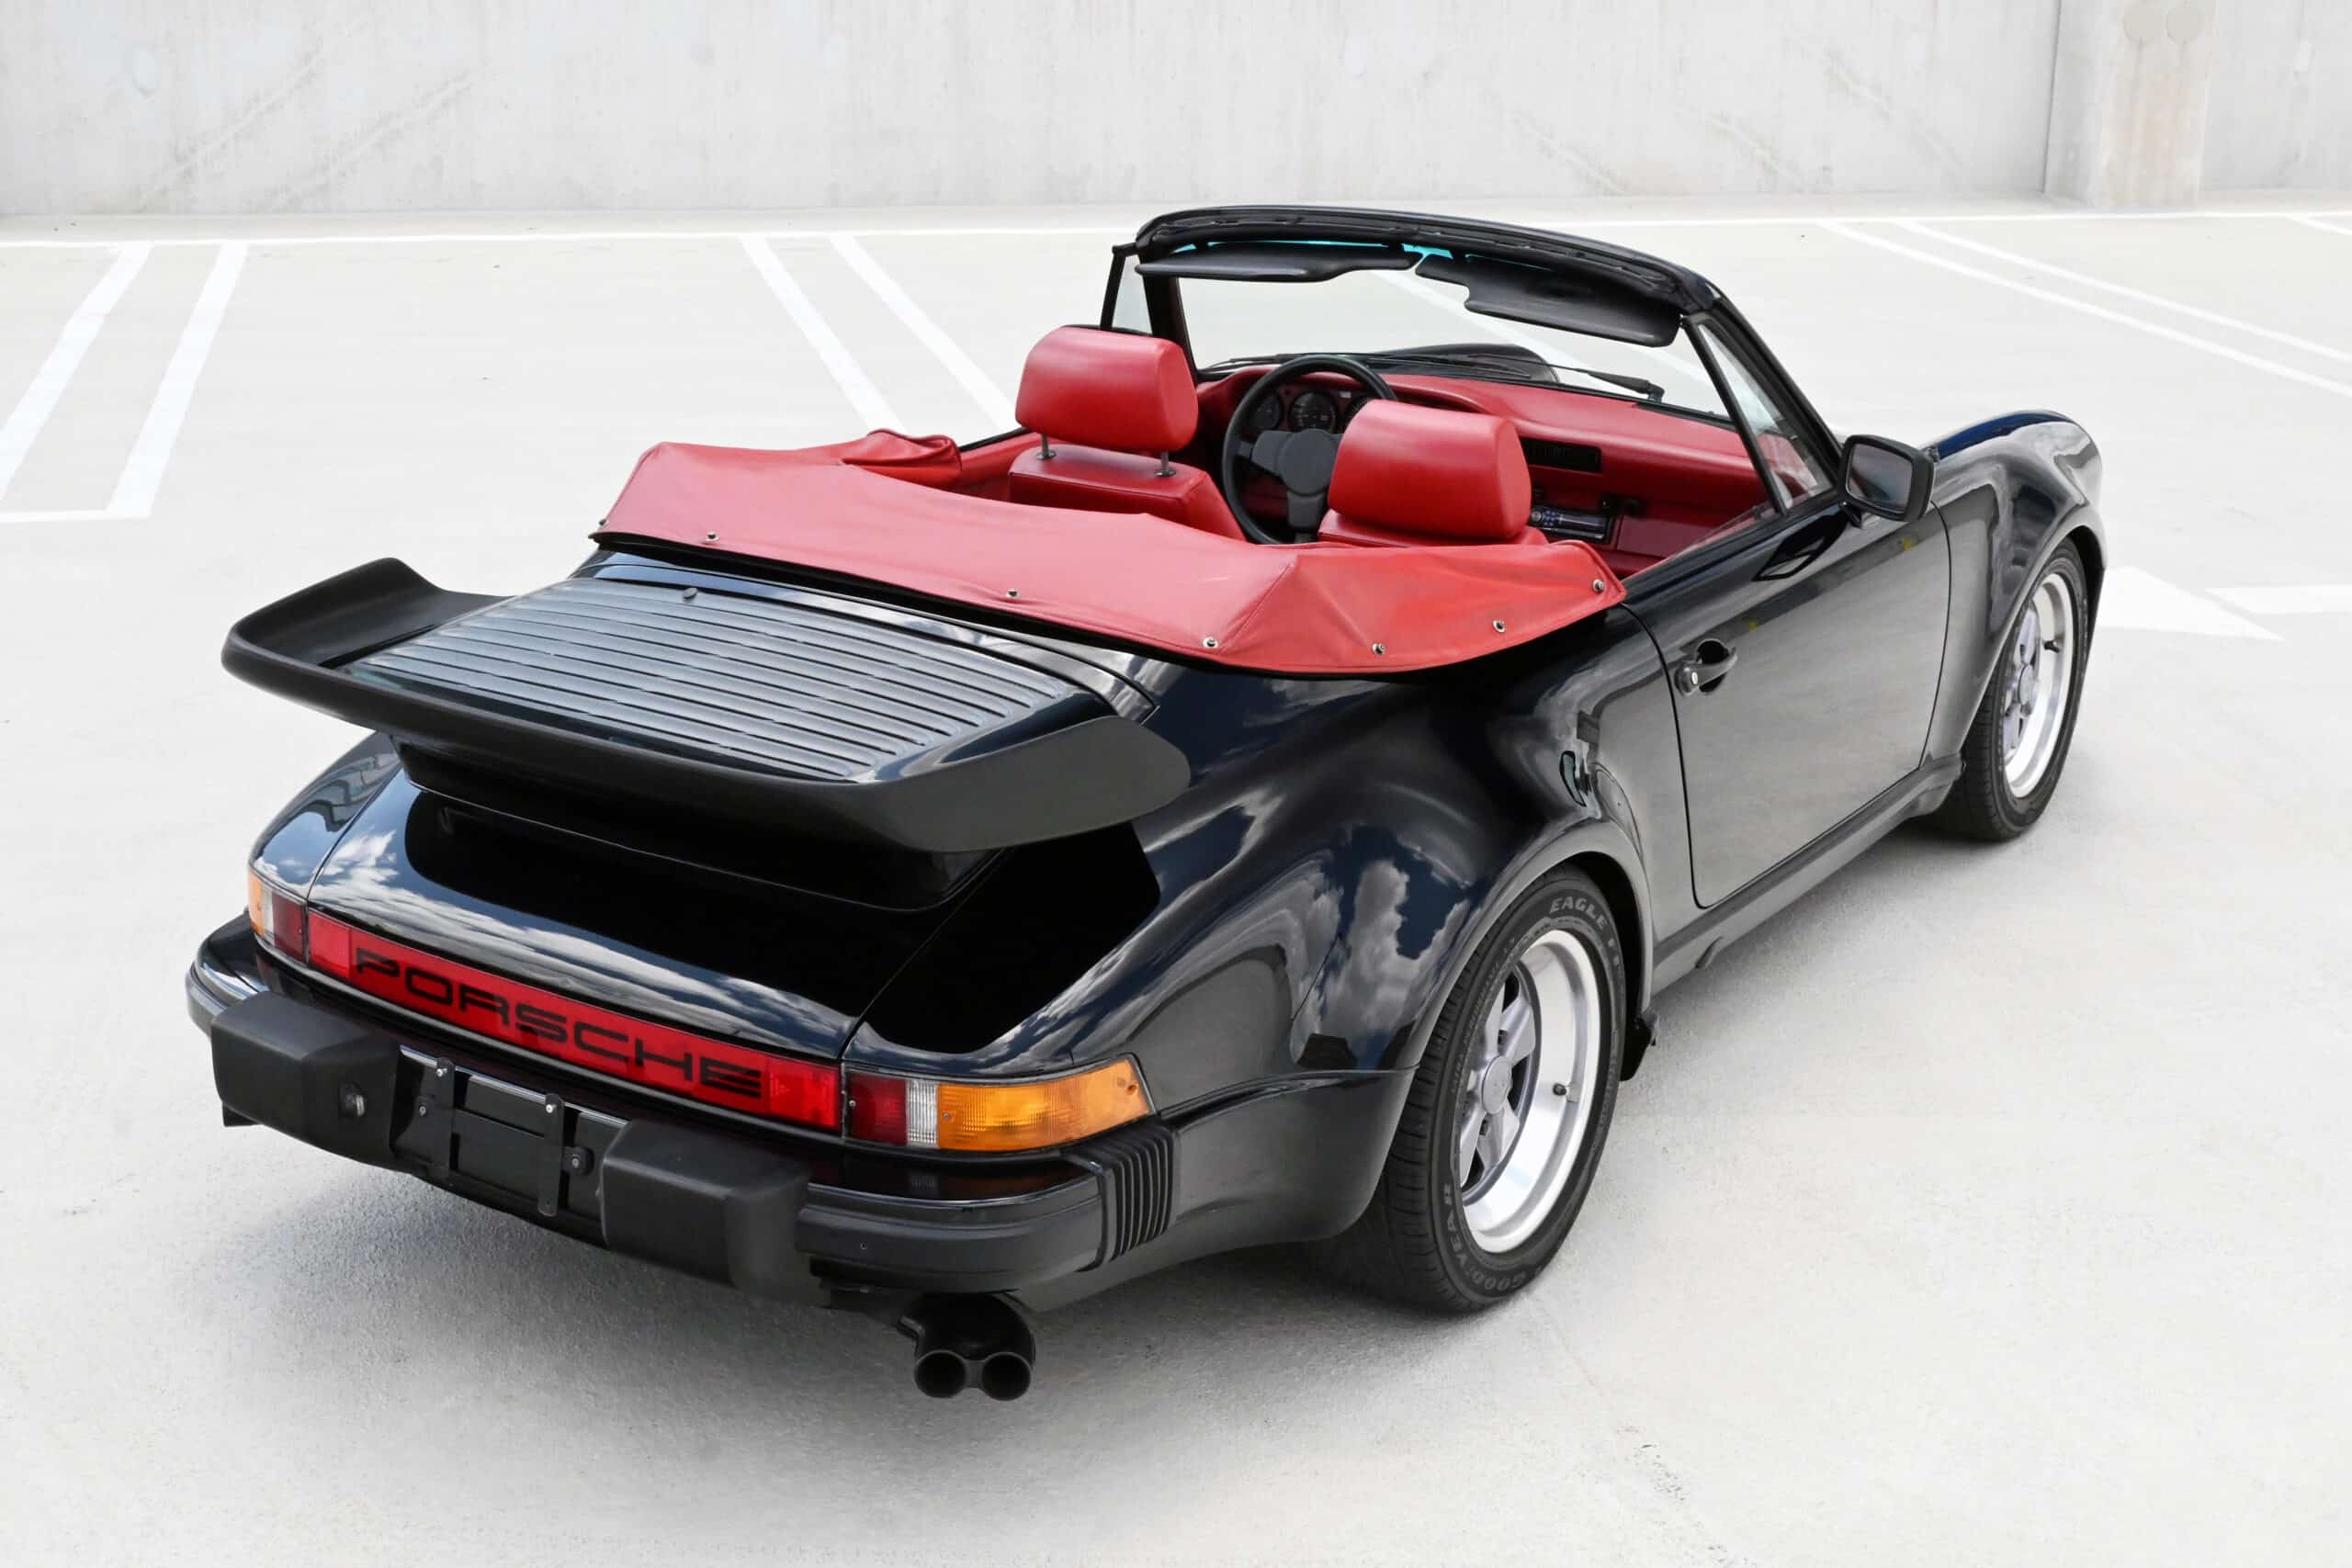 1981 Ruf 930 SCR Turbo / Alois Ruf Personal car / first 911 Turbo Cab / Ruf Certified / Comprehensive Press Coverage Clipping / Service records / 45K miles